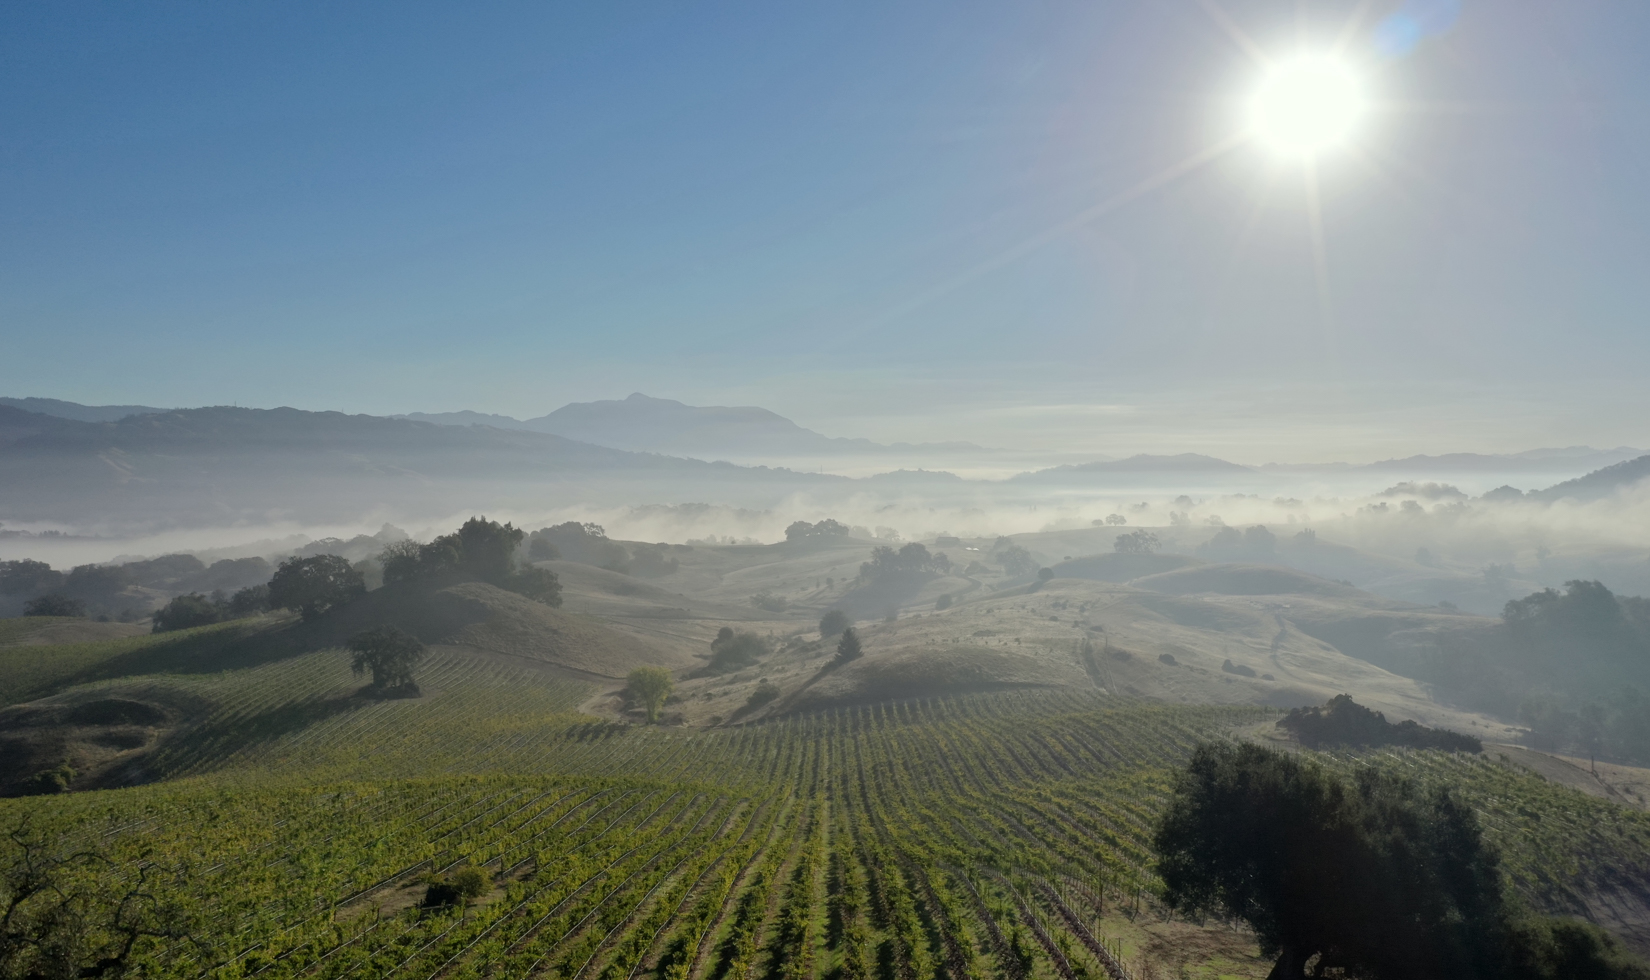 aerial of estate vineyards with trees, mountains and fog in the distance